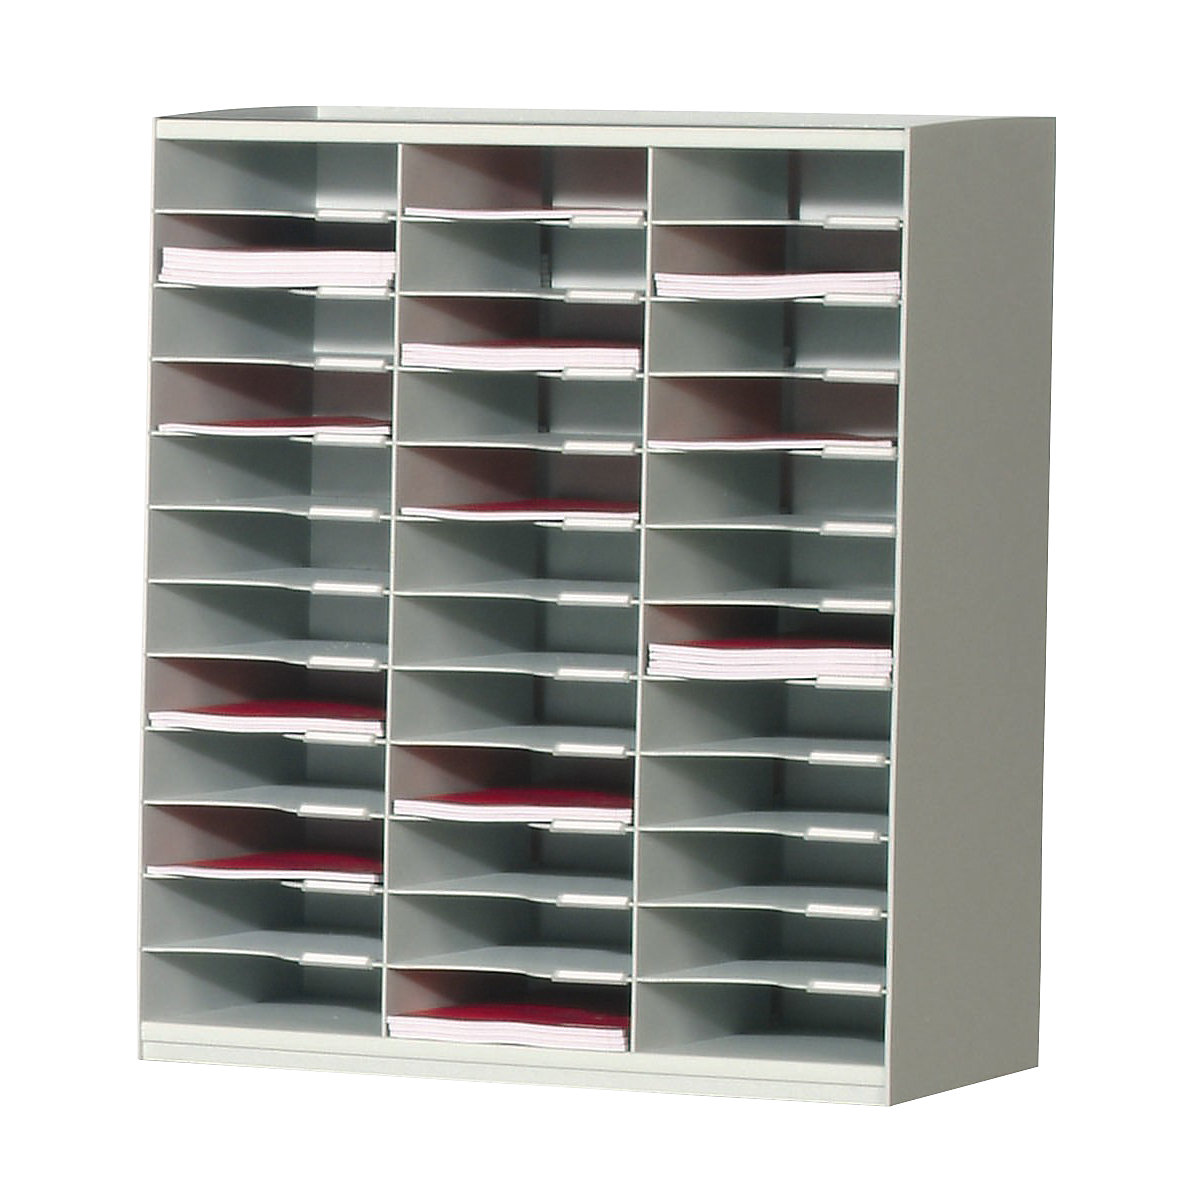 Sorting station, made of polystyrene, 36 compartments, light grey